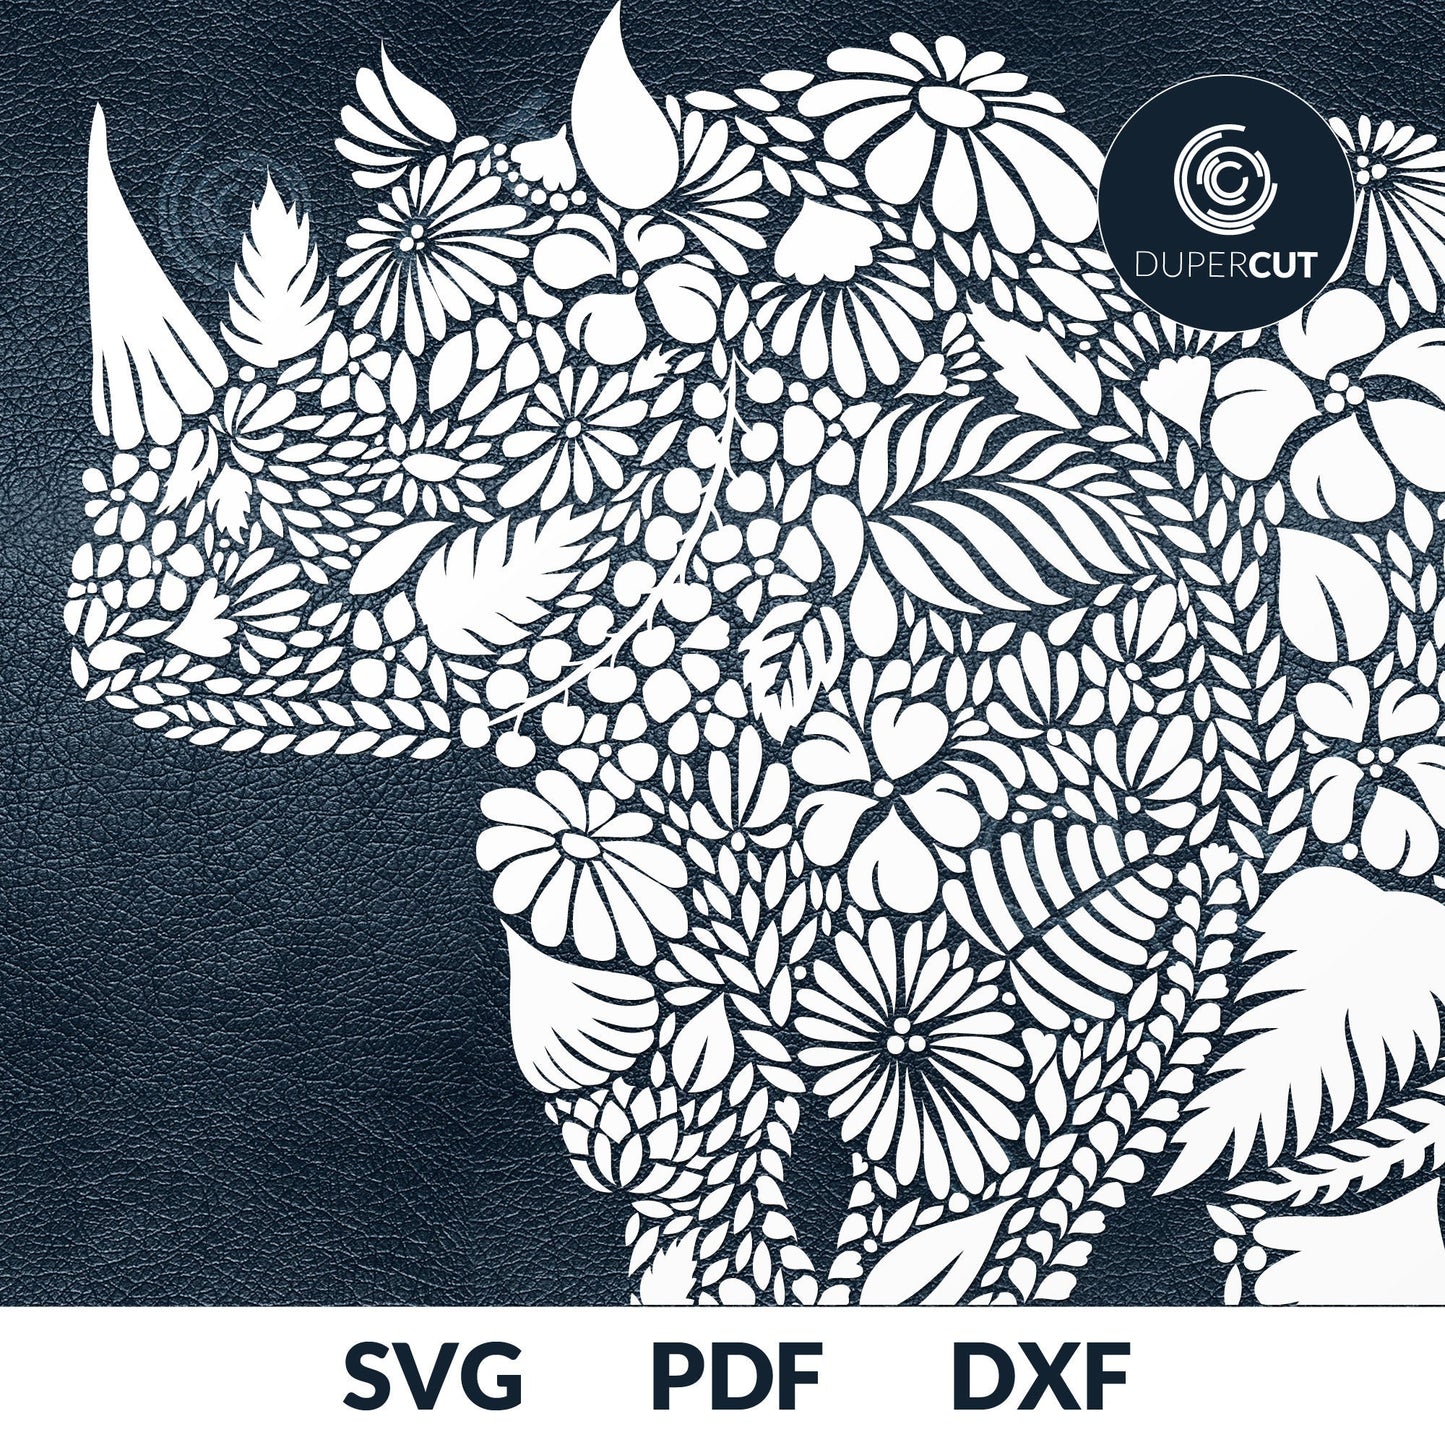 Floral rhynoceros animal, decorative project. SVG PNG DXF cutting files for Cricut, Silhouette, Glowforge, print on demand, sublimation templates